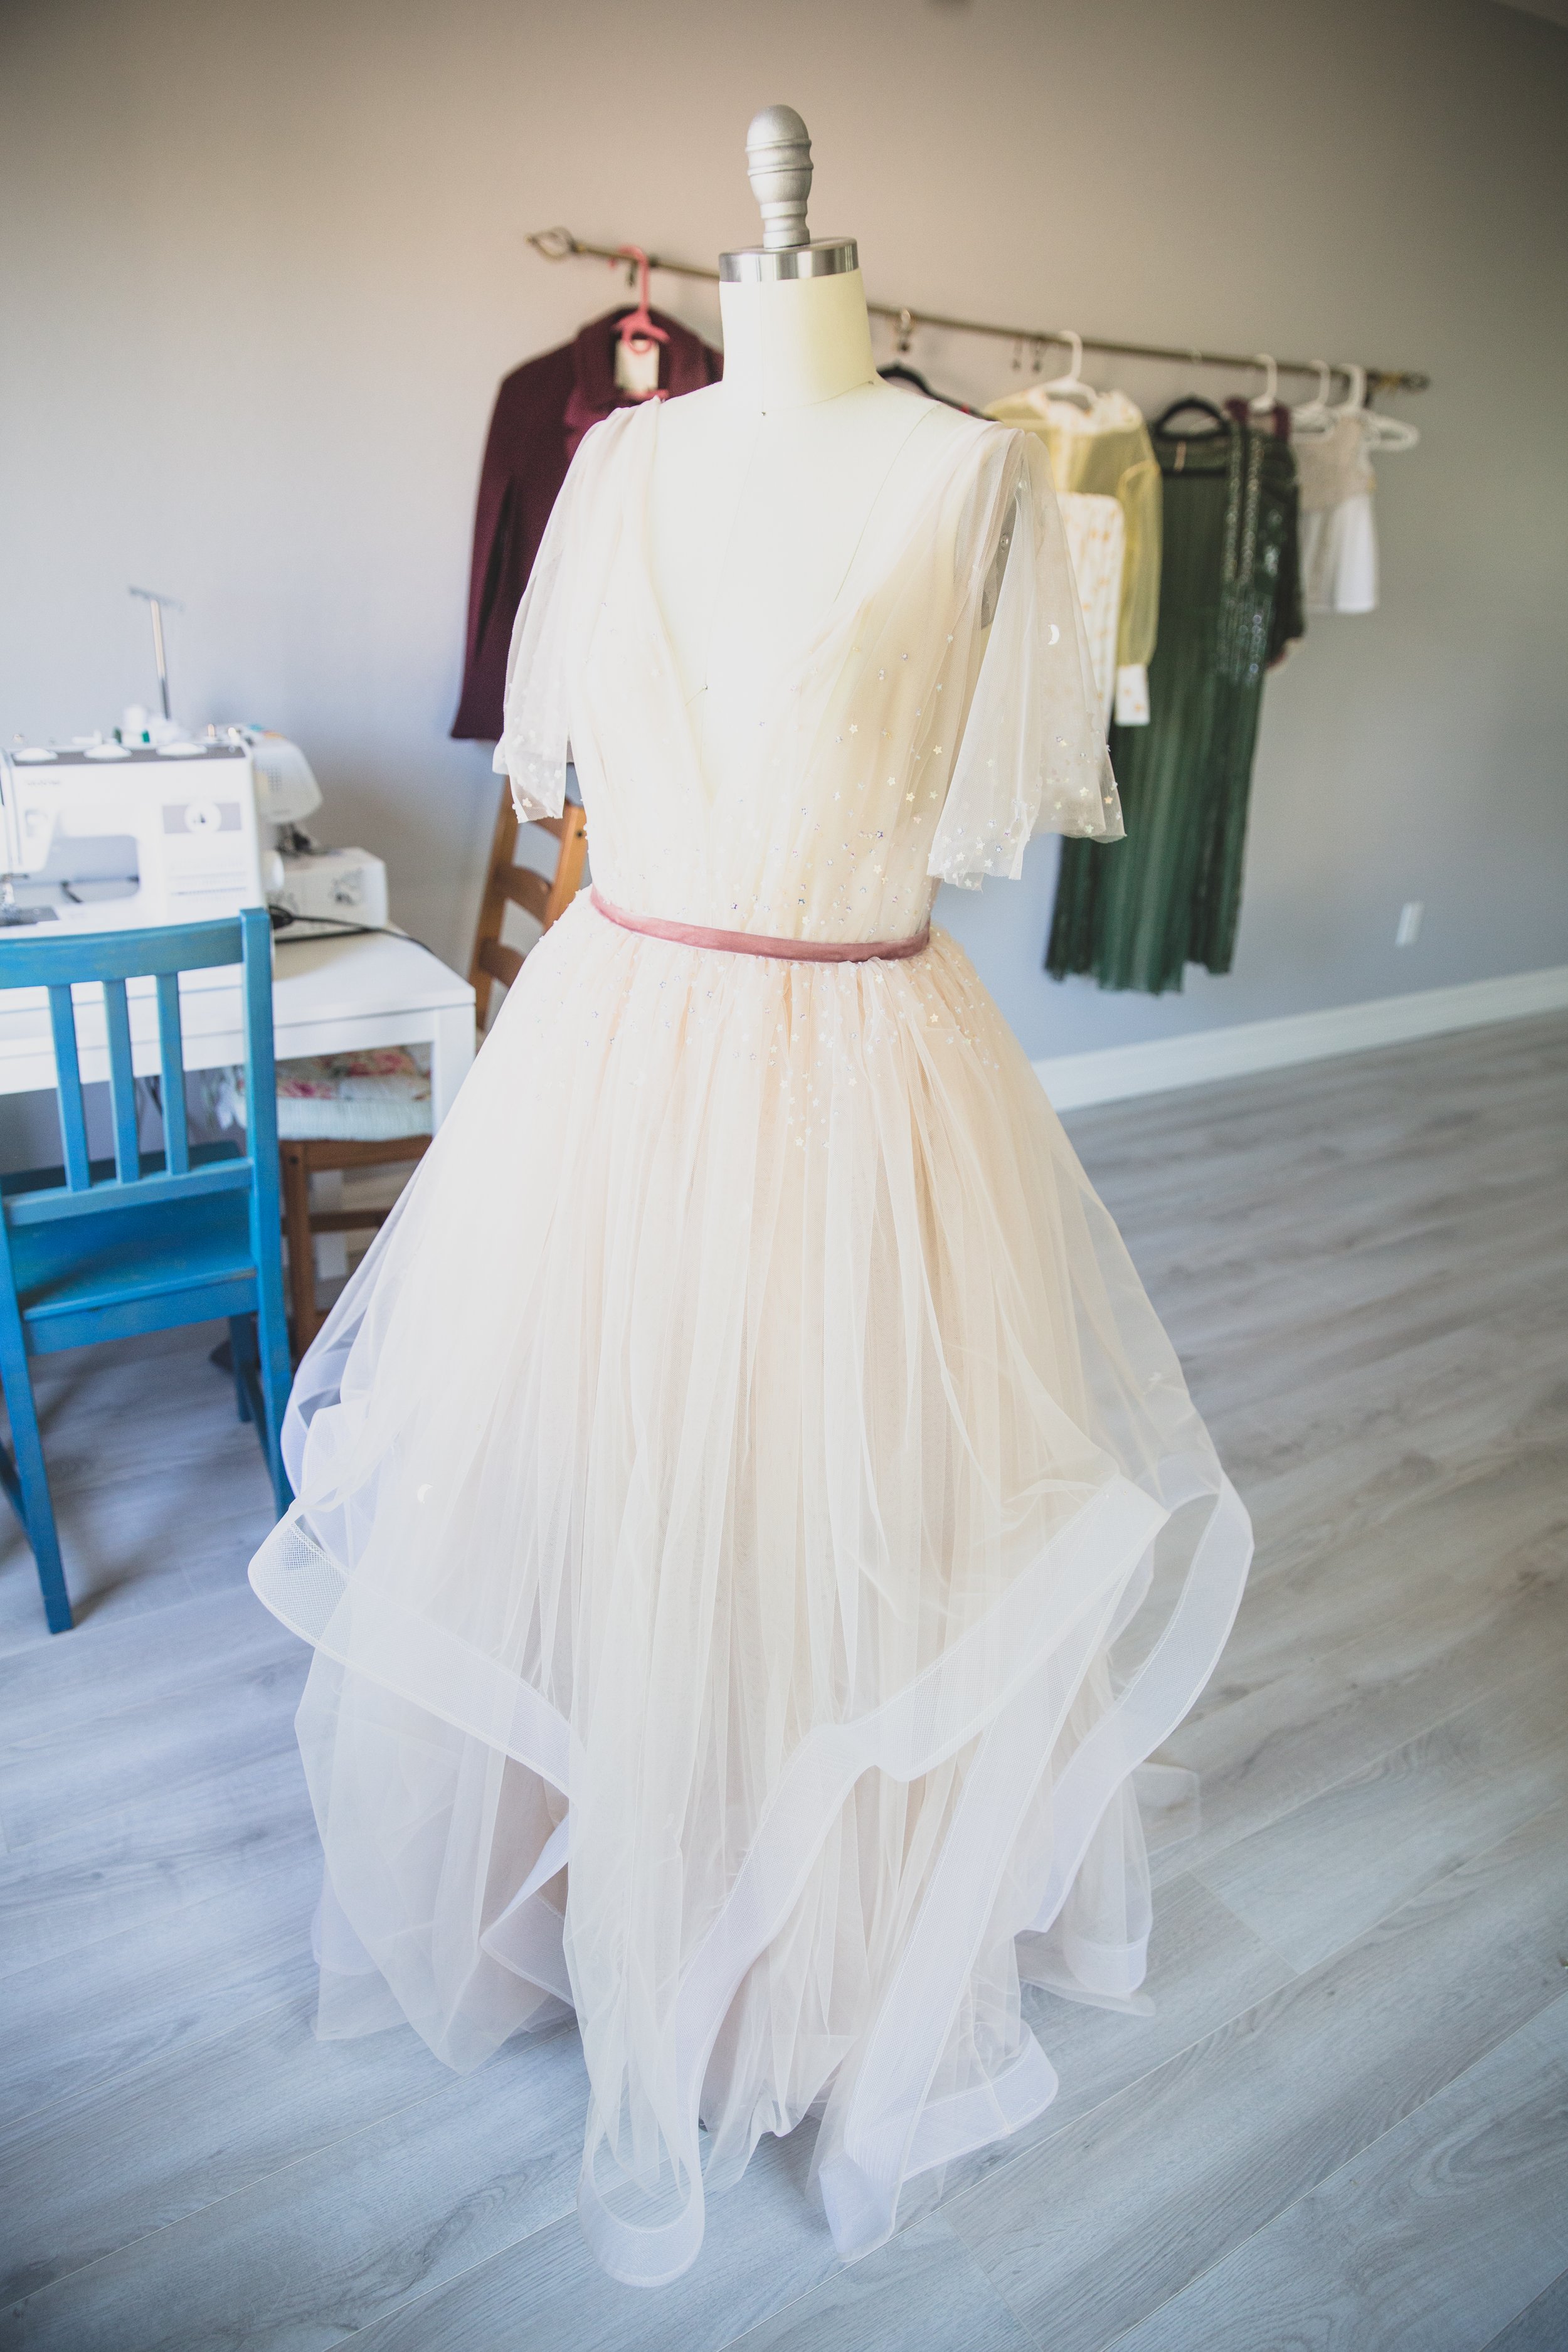 Handmade wedding dress, outfit inspiration for intimate Superstition Mountain micro wedding in Arizona by experienced wedding photographer, Jennifer Lind Schutsky. 